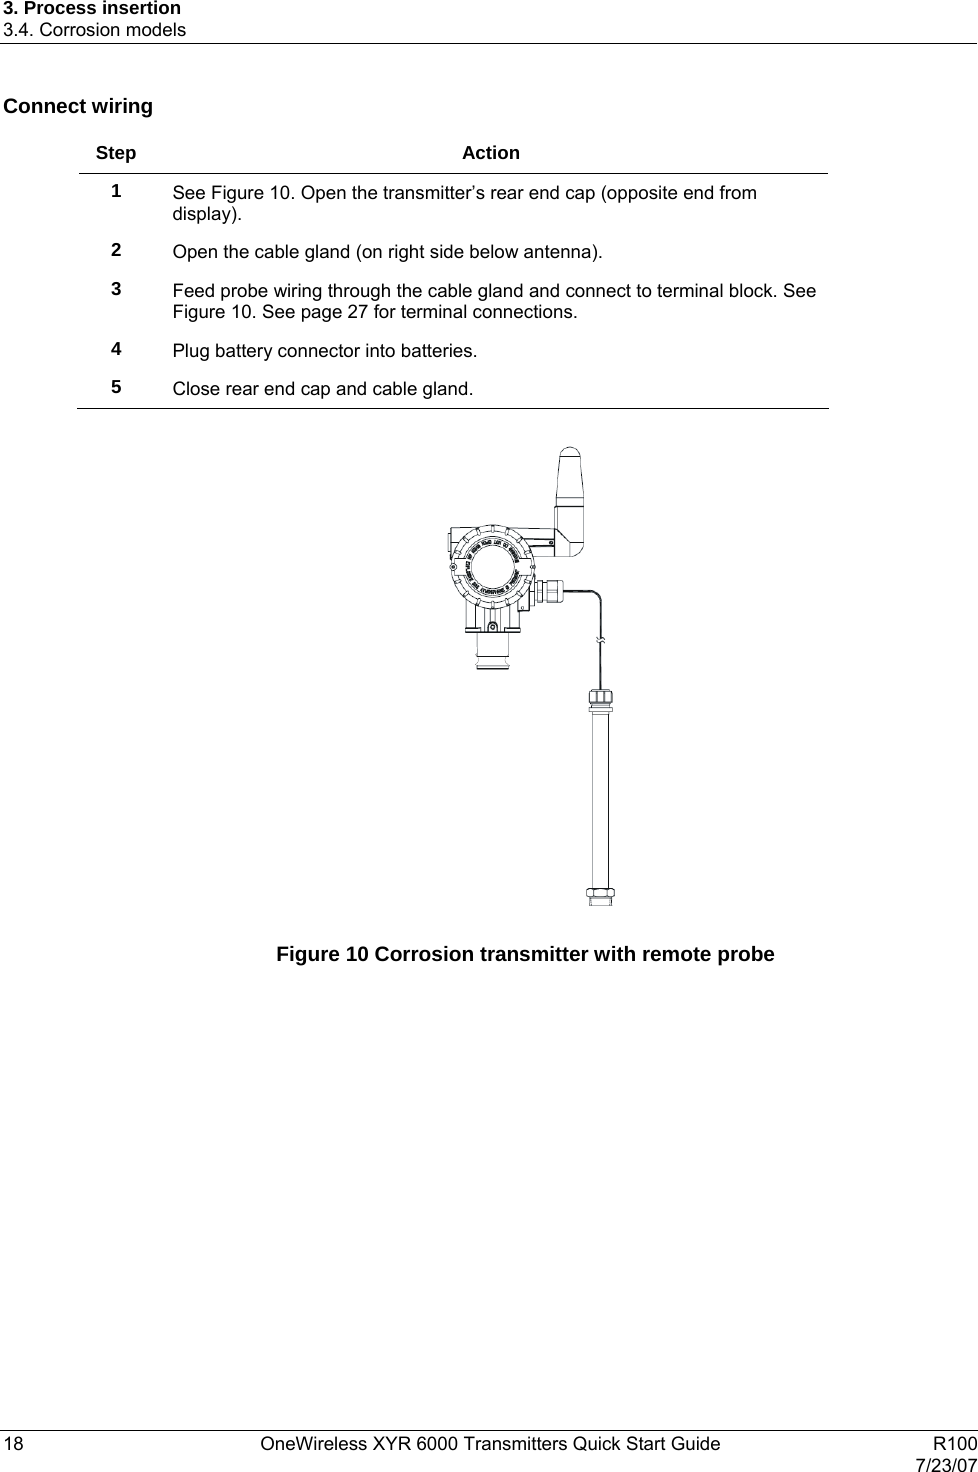 3. Process insertion 3.4. Corrosion models 18  OneWireless XYR 6000 Transmitters Quick Start Guide   R100   7/23/07 Connect wiring  Step Action 1  See Figure 10. Open the transmitter’s rear end cap (opposite end from display). 2  Open the cable gland (on right side below antenna). 3  Feed probe wiring through the cable gland and connect to terminal block. See Figure 10. See page 27 for terminal connections. 4  Plug battery connector into batteries. 5  Close rear end cap and cable gland.     Figure 10 Corrosion transmitter with remote probe   